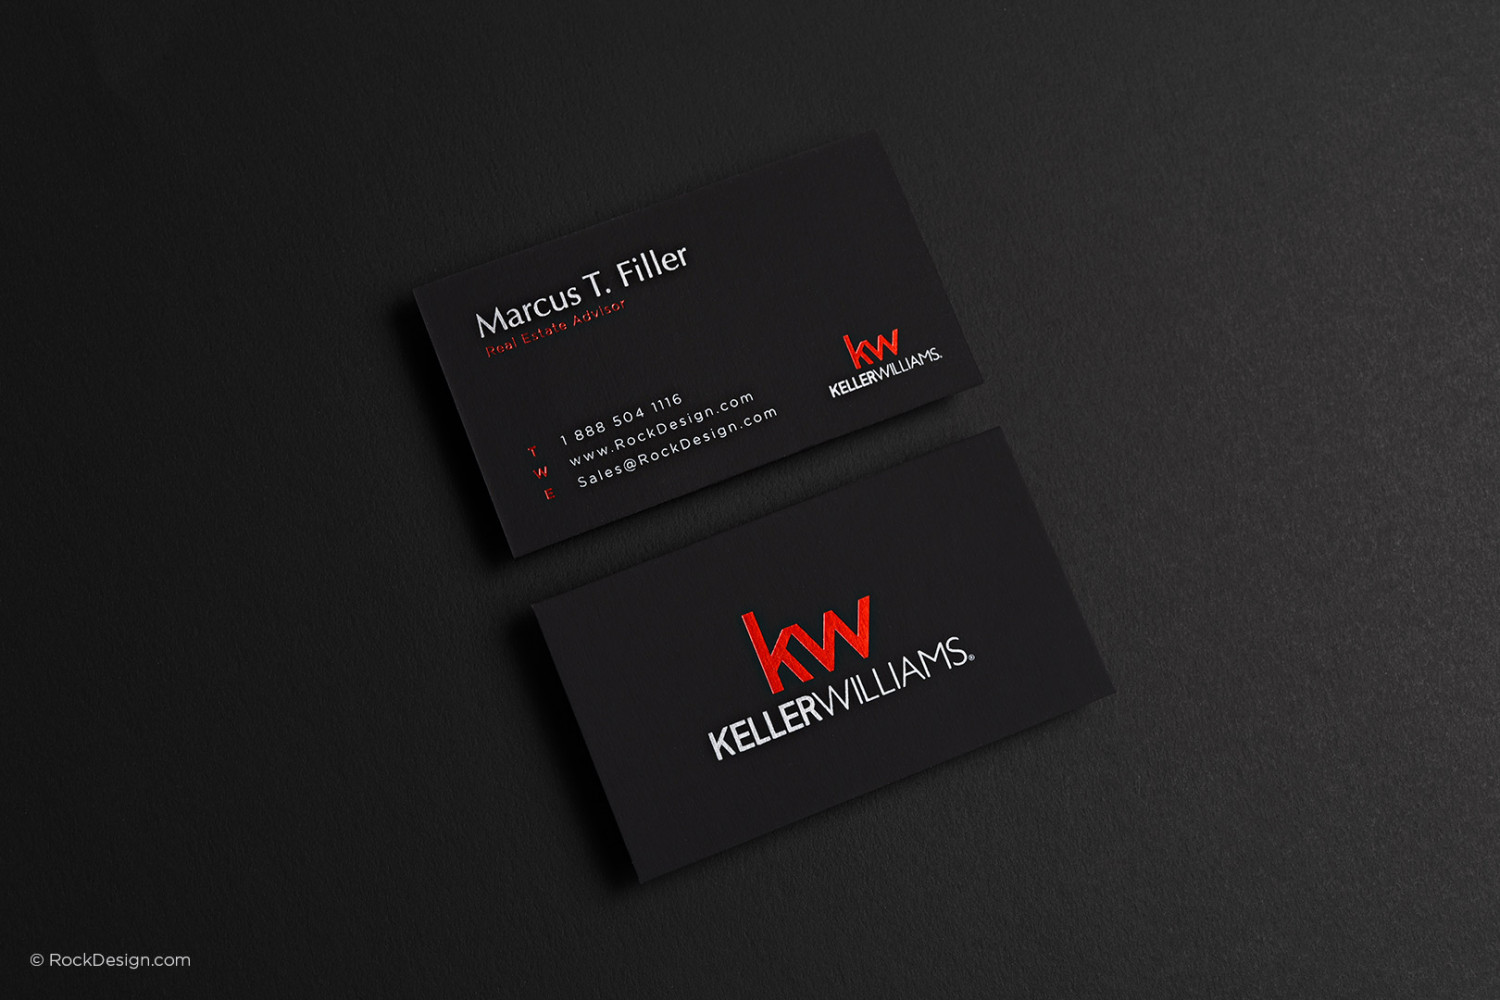 FREE Keller Williams business card template with print service | RockDesign.com